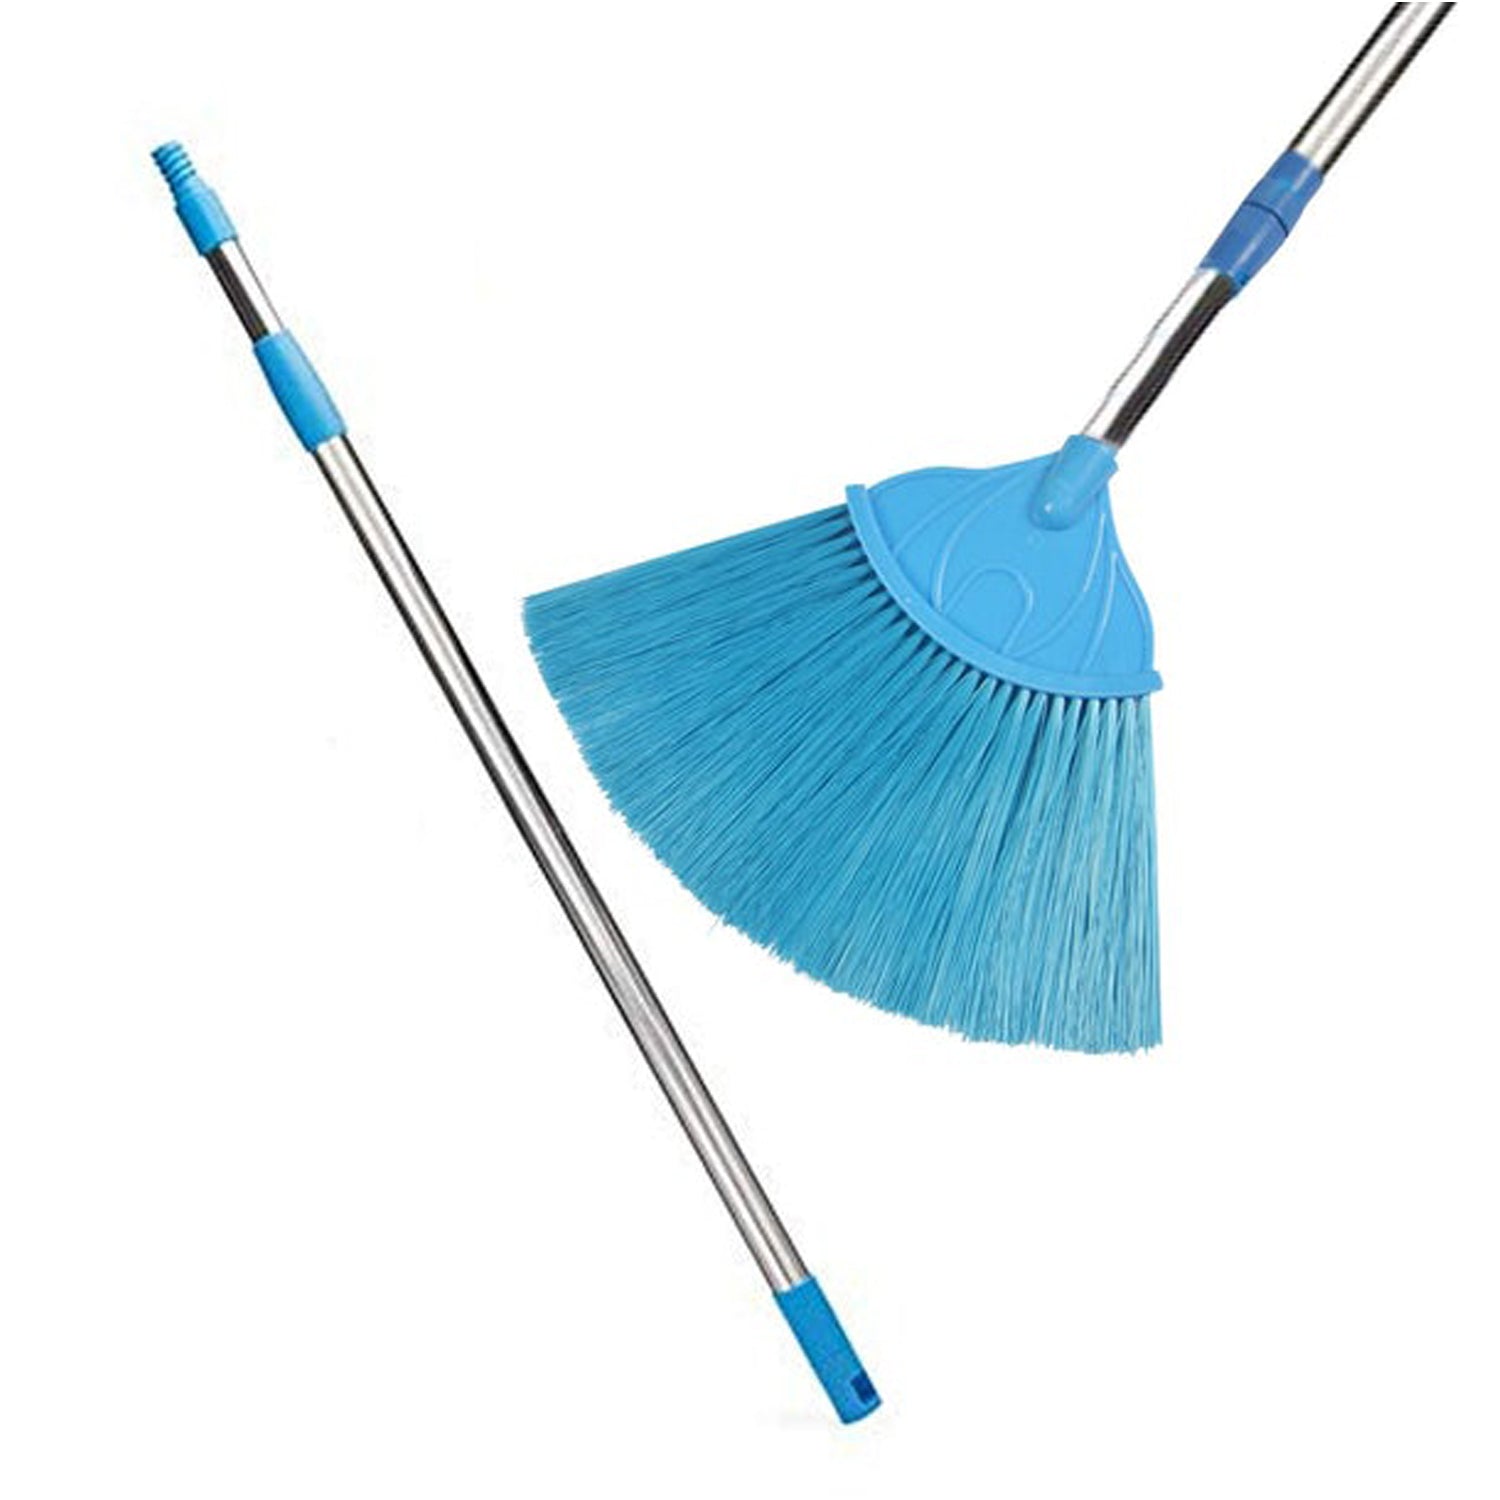 4779 Ceiling Broom Fan for cleaning and wiping over dusty floor surfaces with effective performance. 